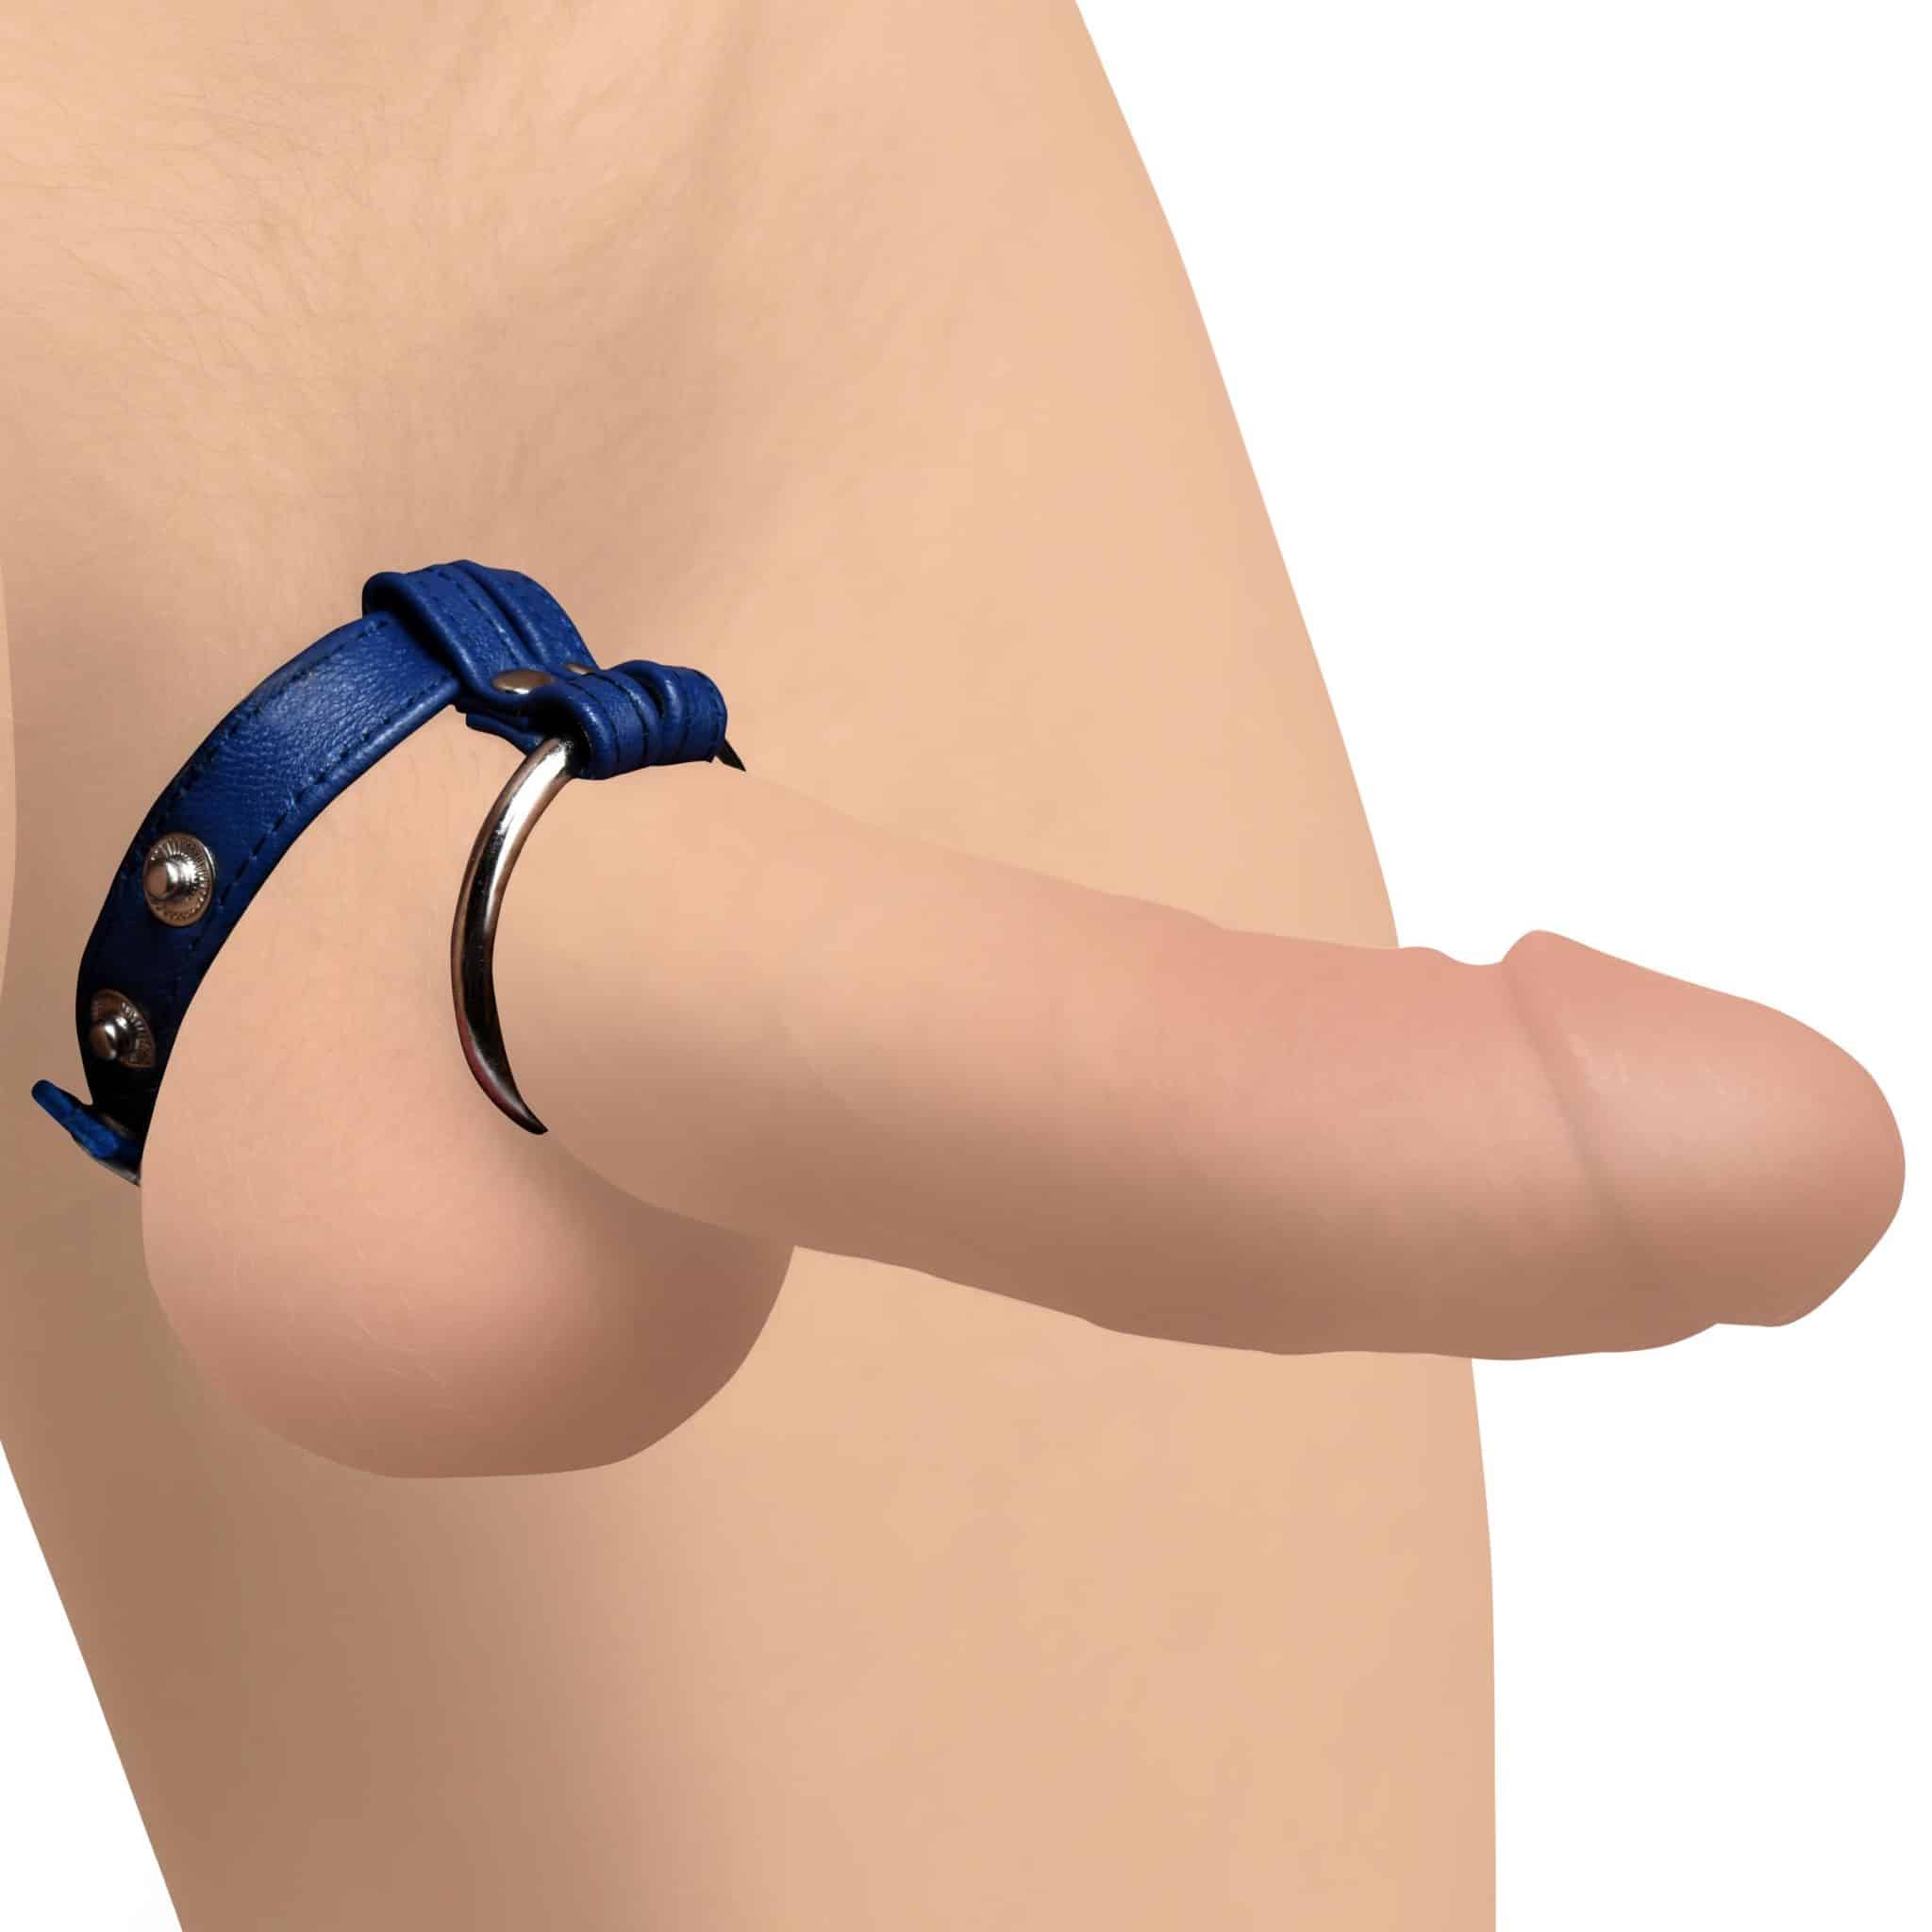 Leather and Steel Cock and Ball Ring – Blue